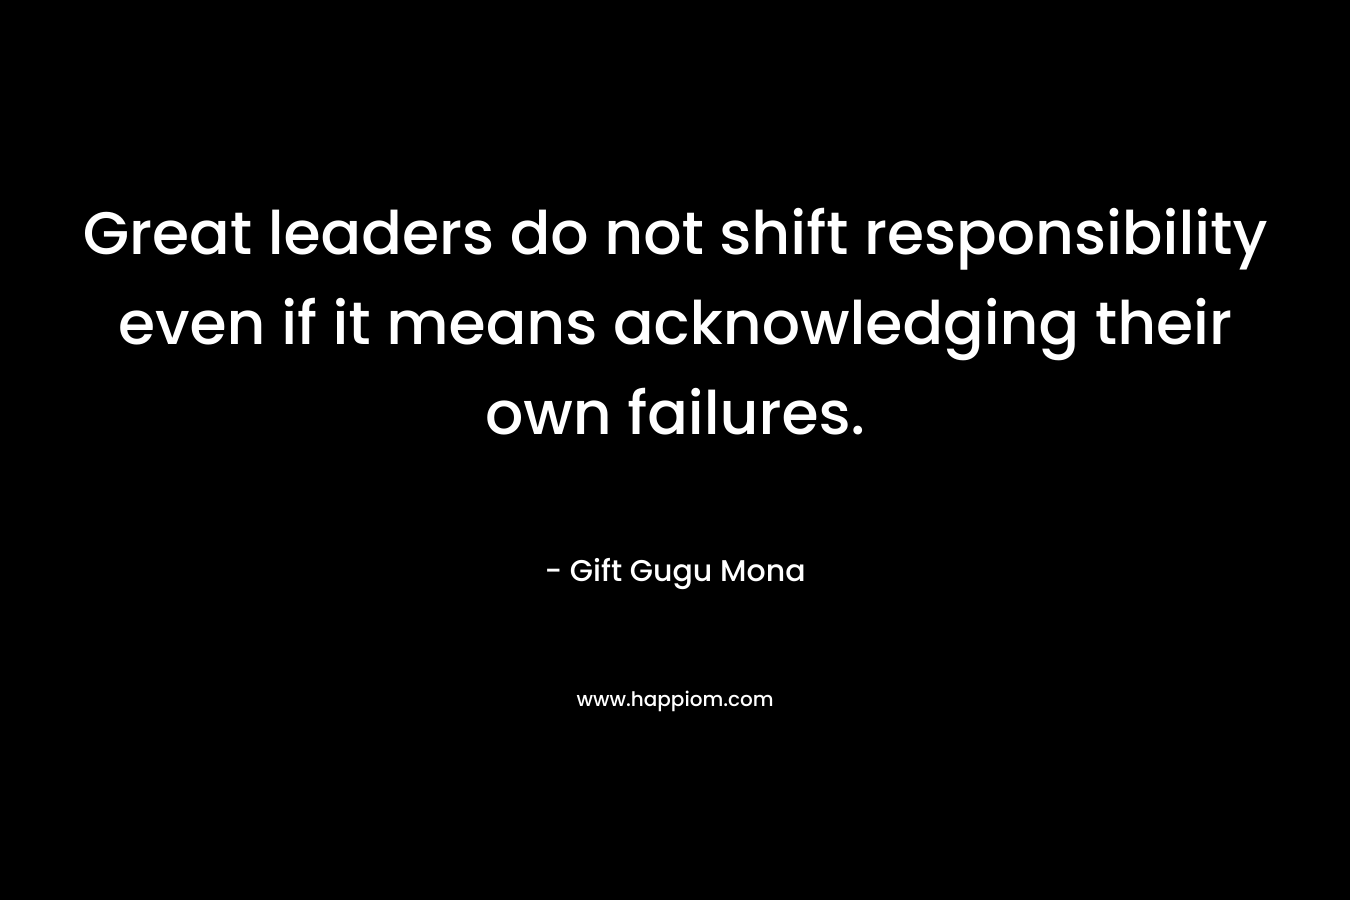 Great leaders do not shift responsibility even if it means acknowledging their own failures. – Gift Gugu Mona